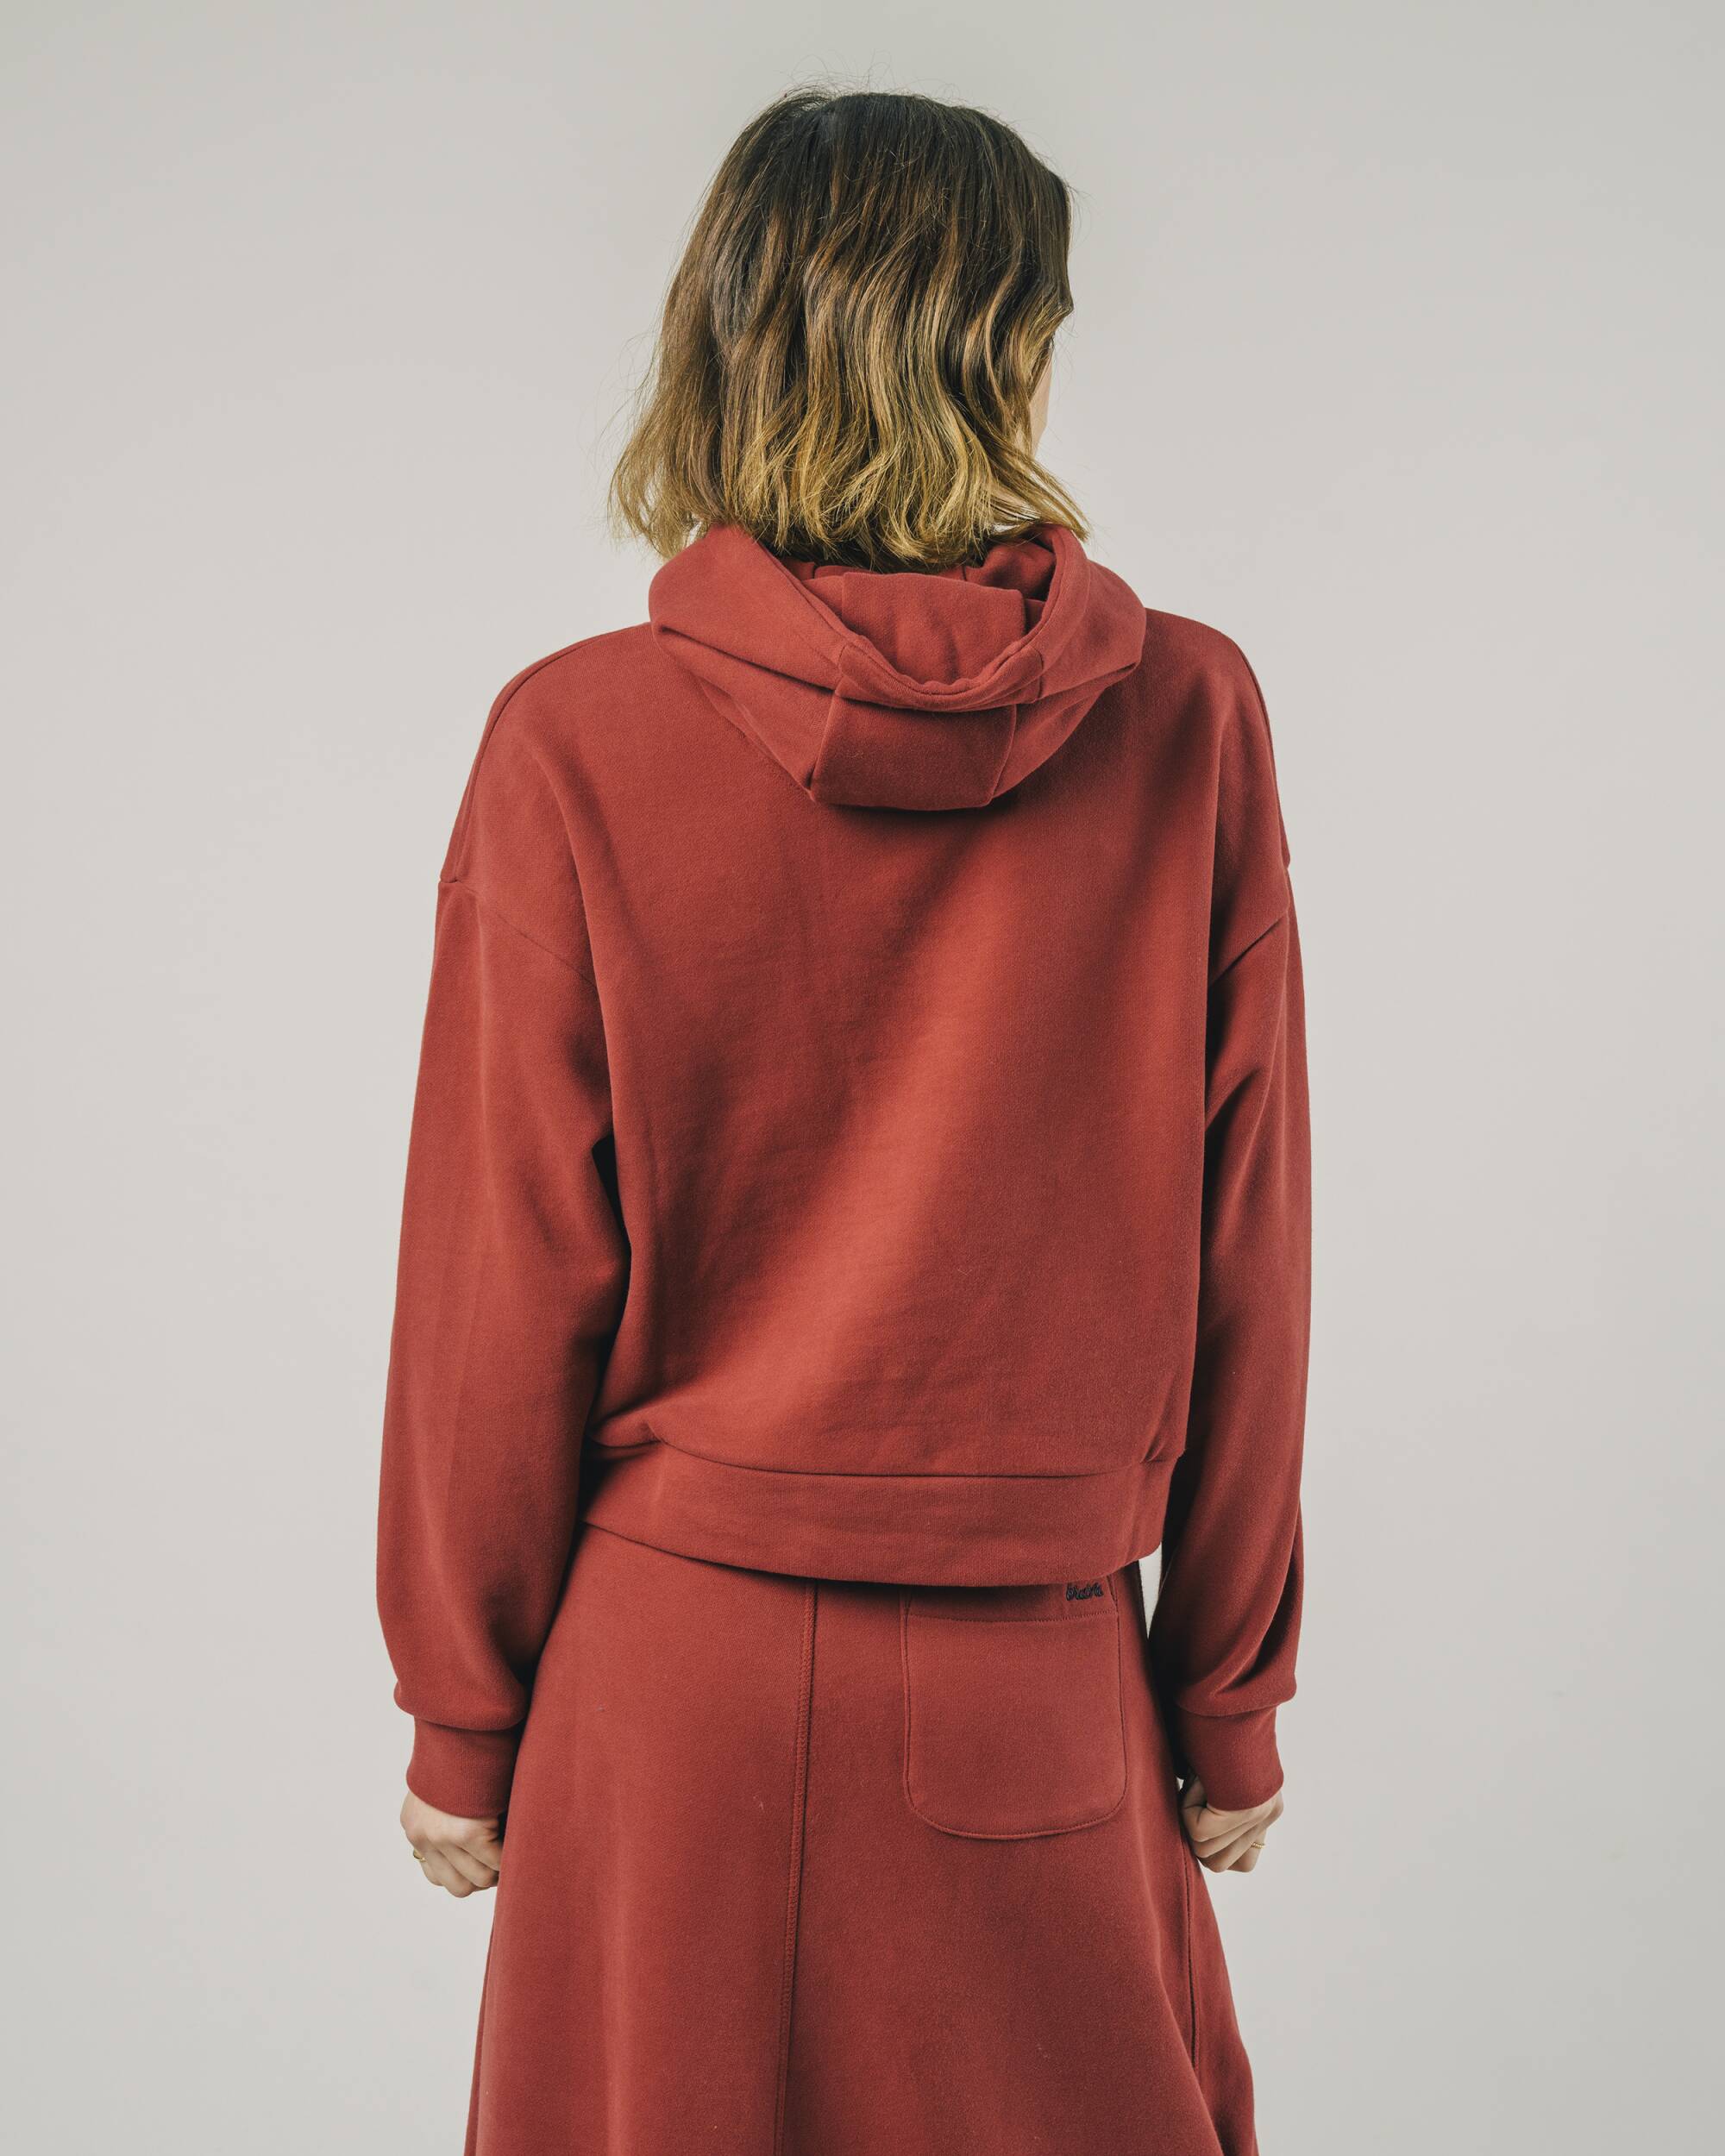 Red cropped sweater made of organic cotton from Brava Fabrics